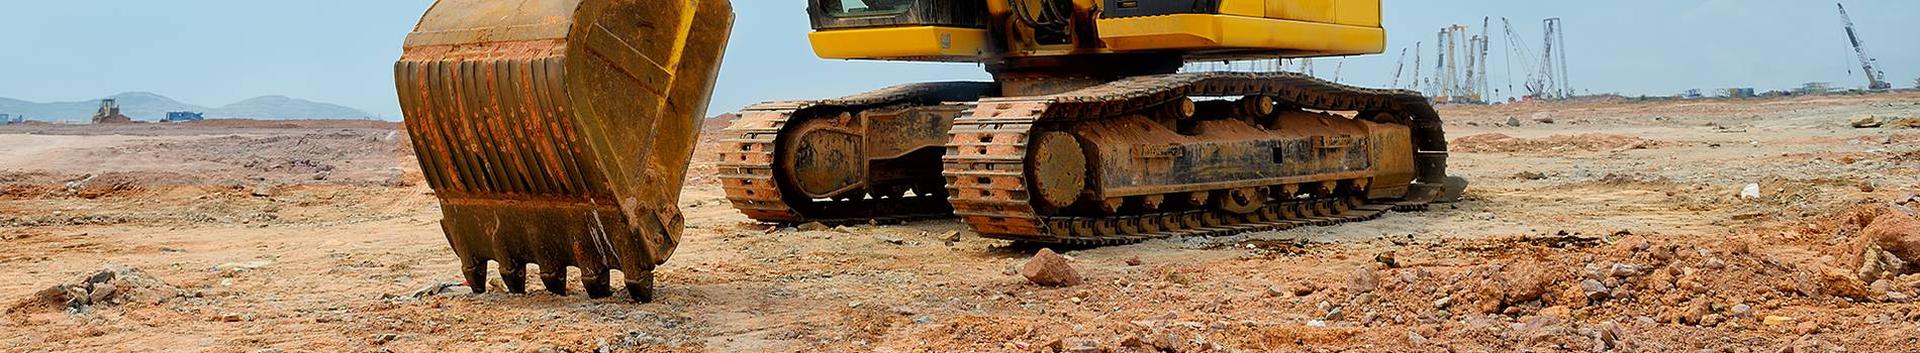 Mining machinery, mineral resources